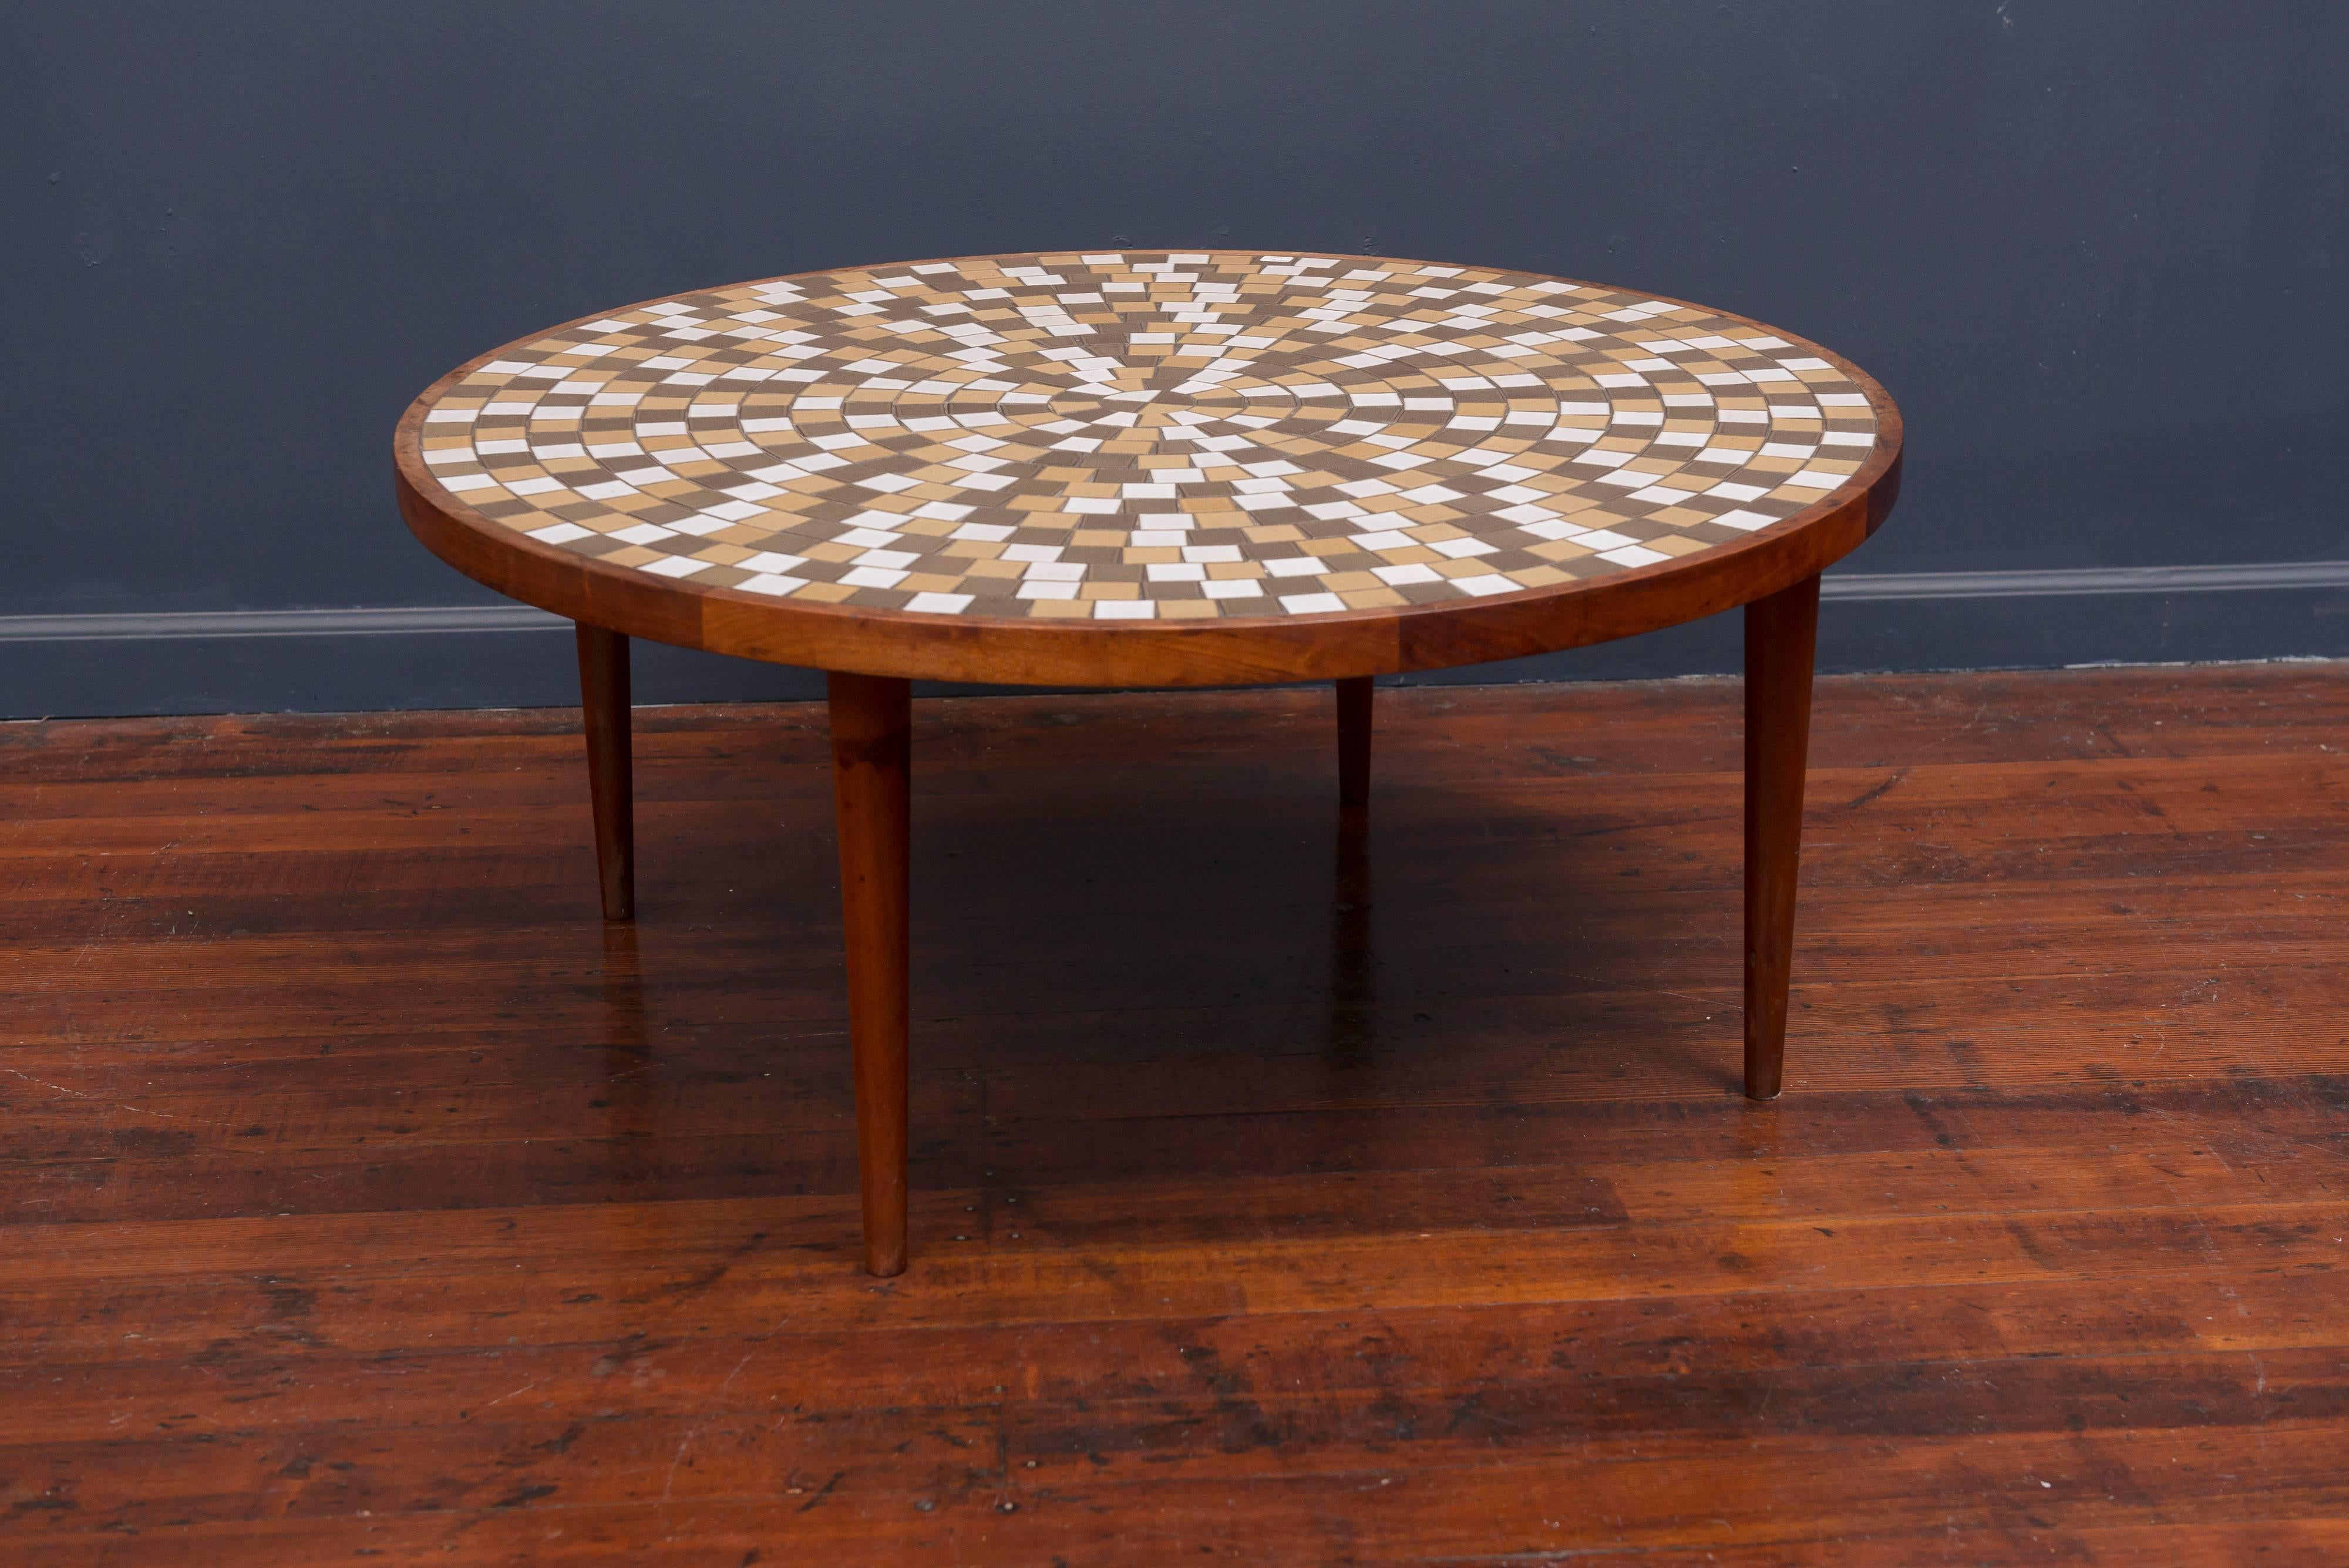 Colorful ceramic tile top coffee table designed by Gordon and Jane Martz.